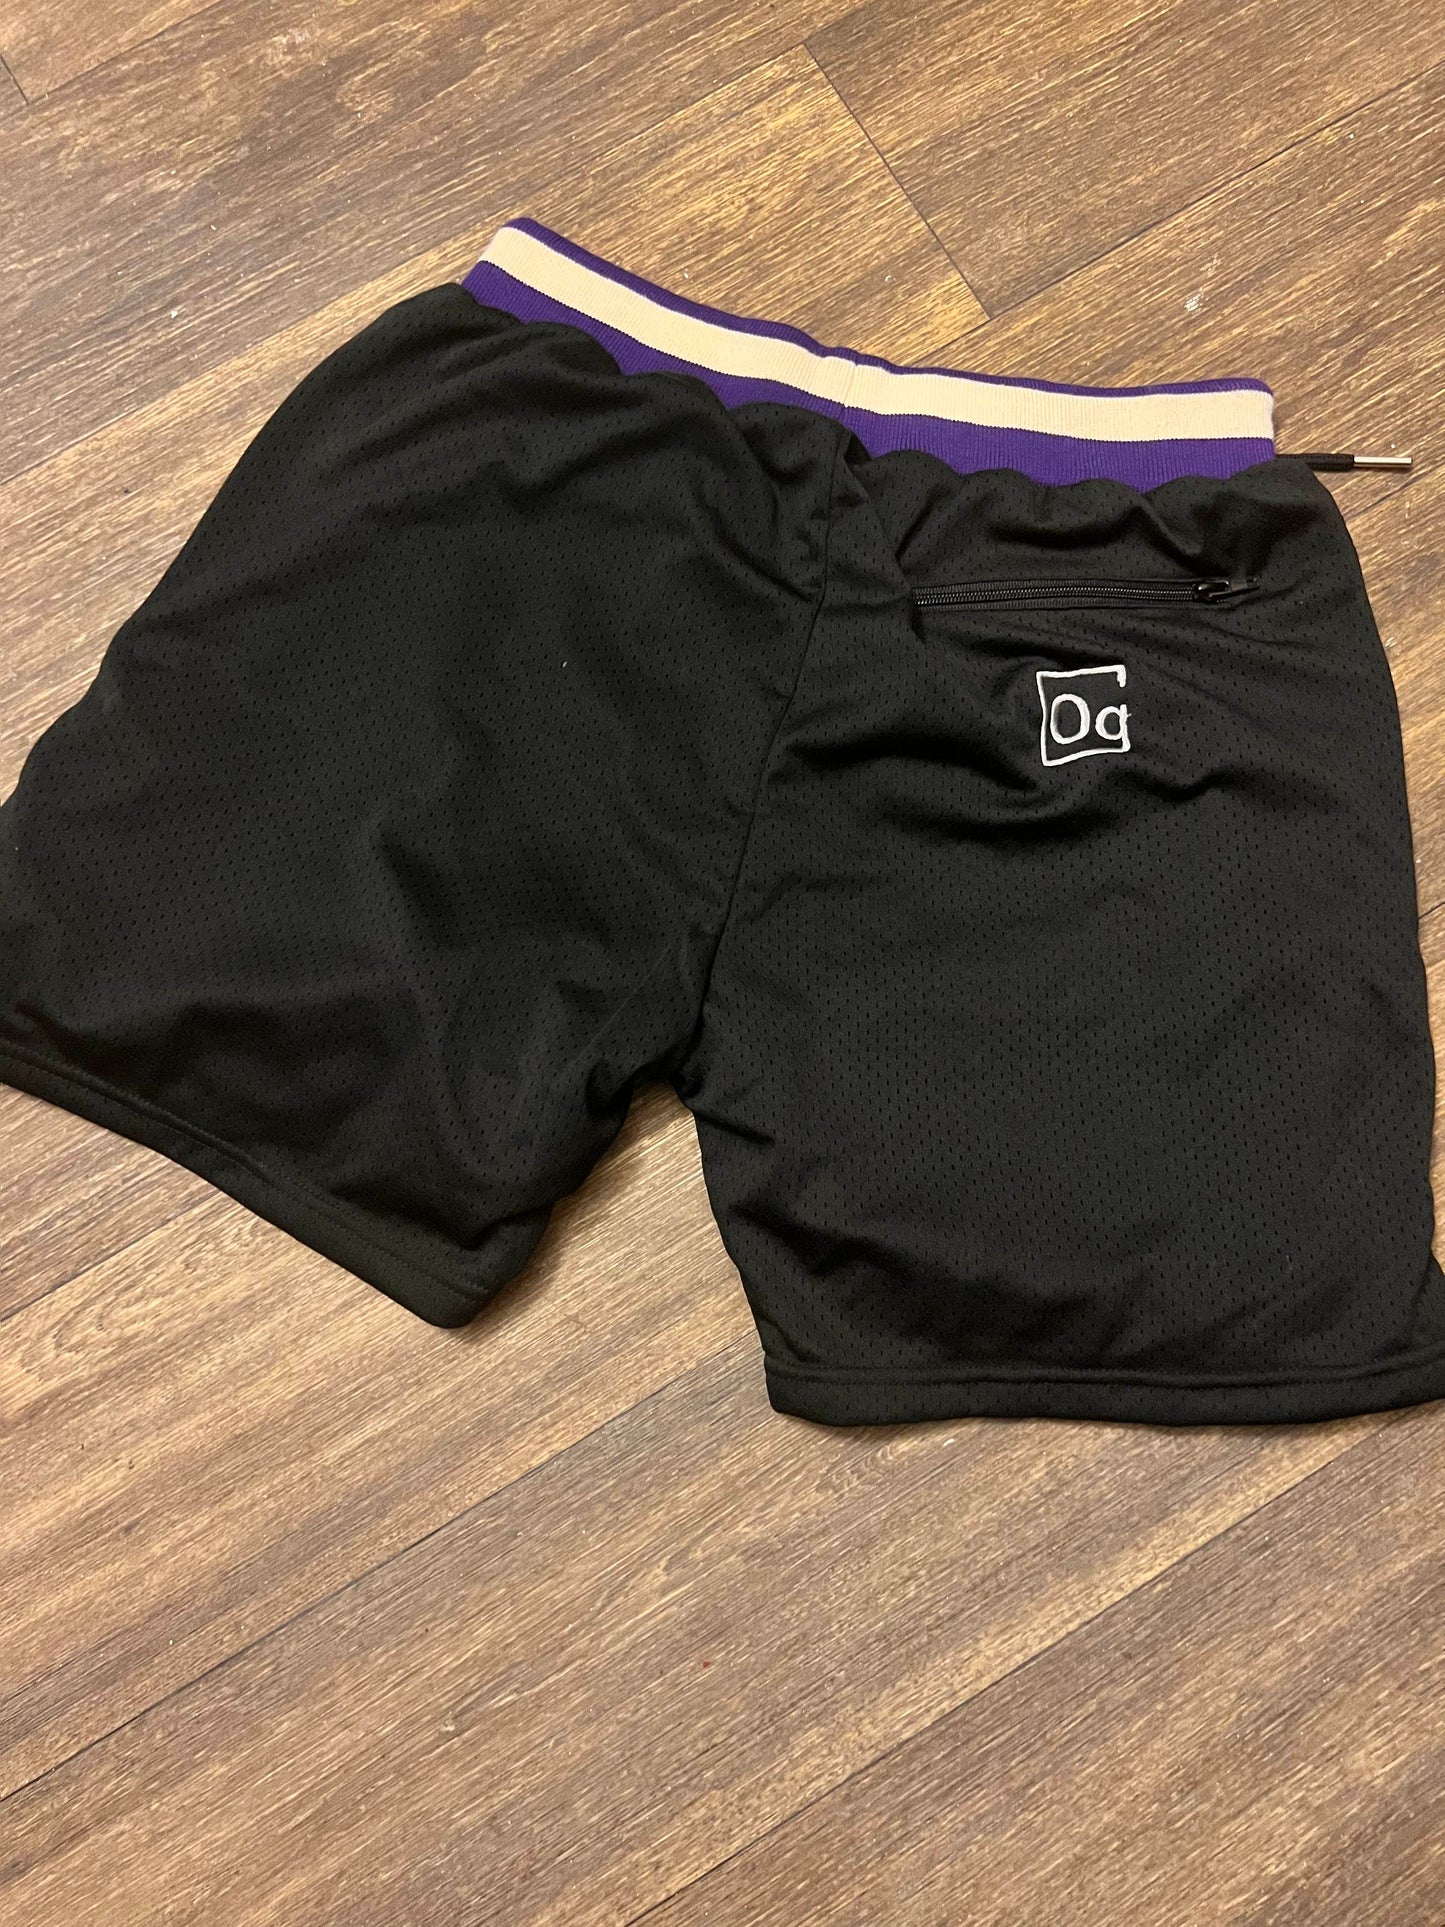 Sold NOT Told Mesh shorts